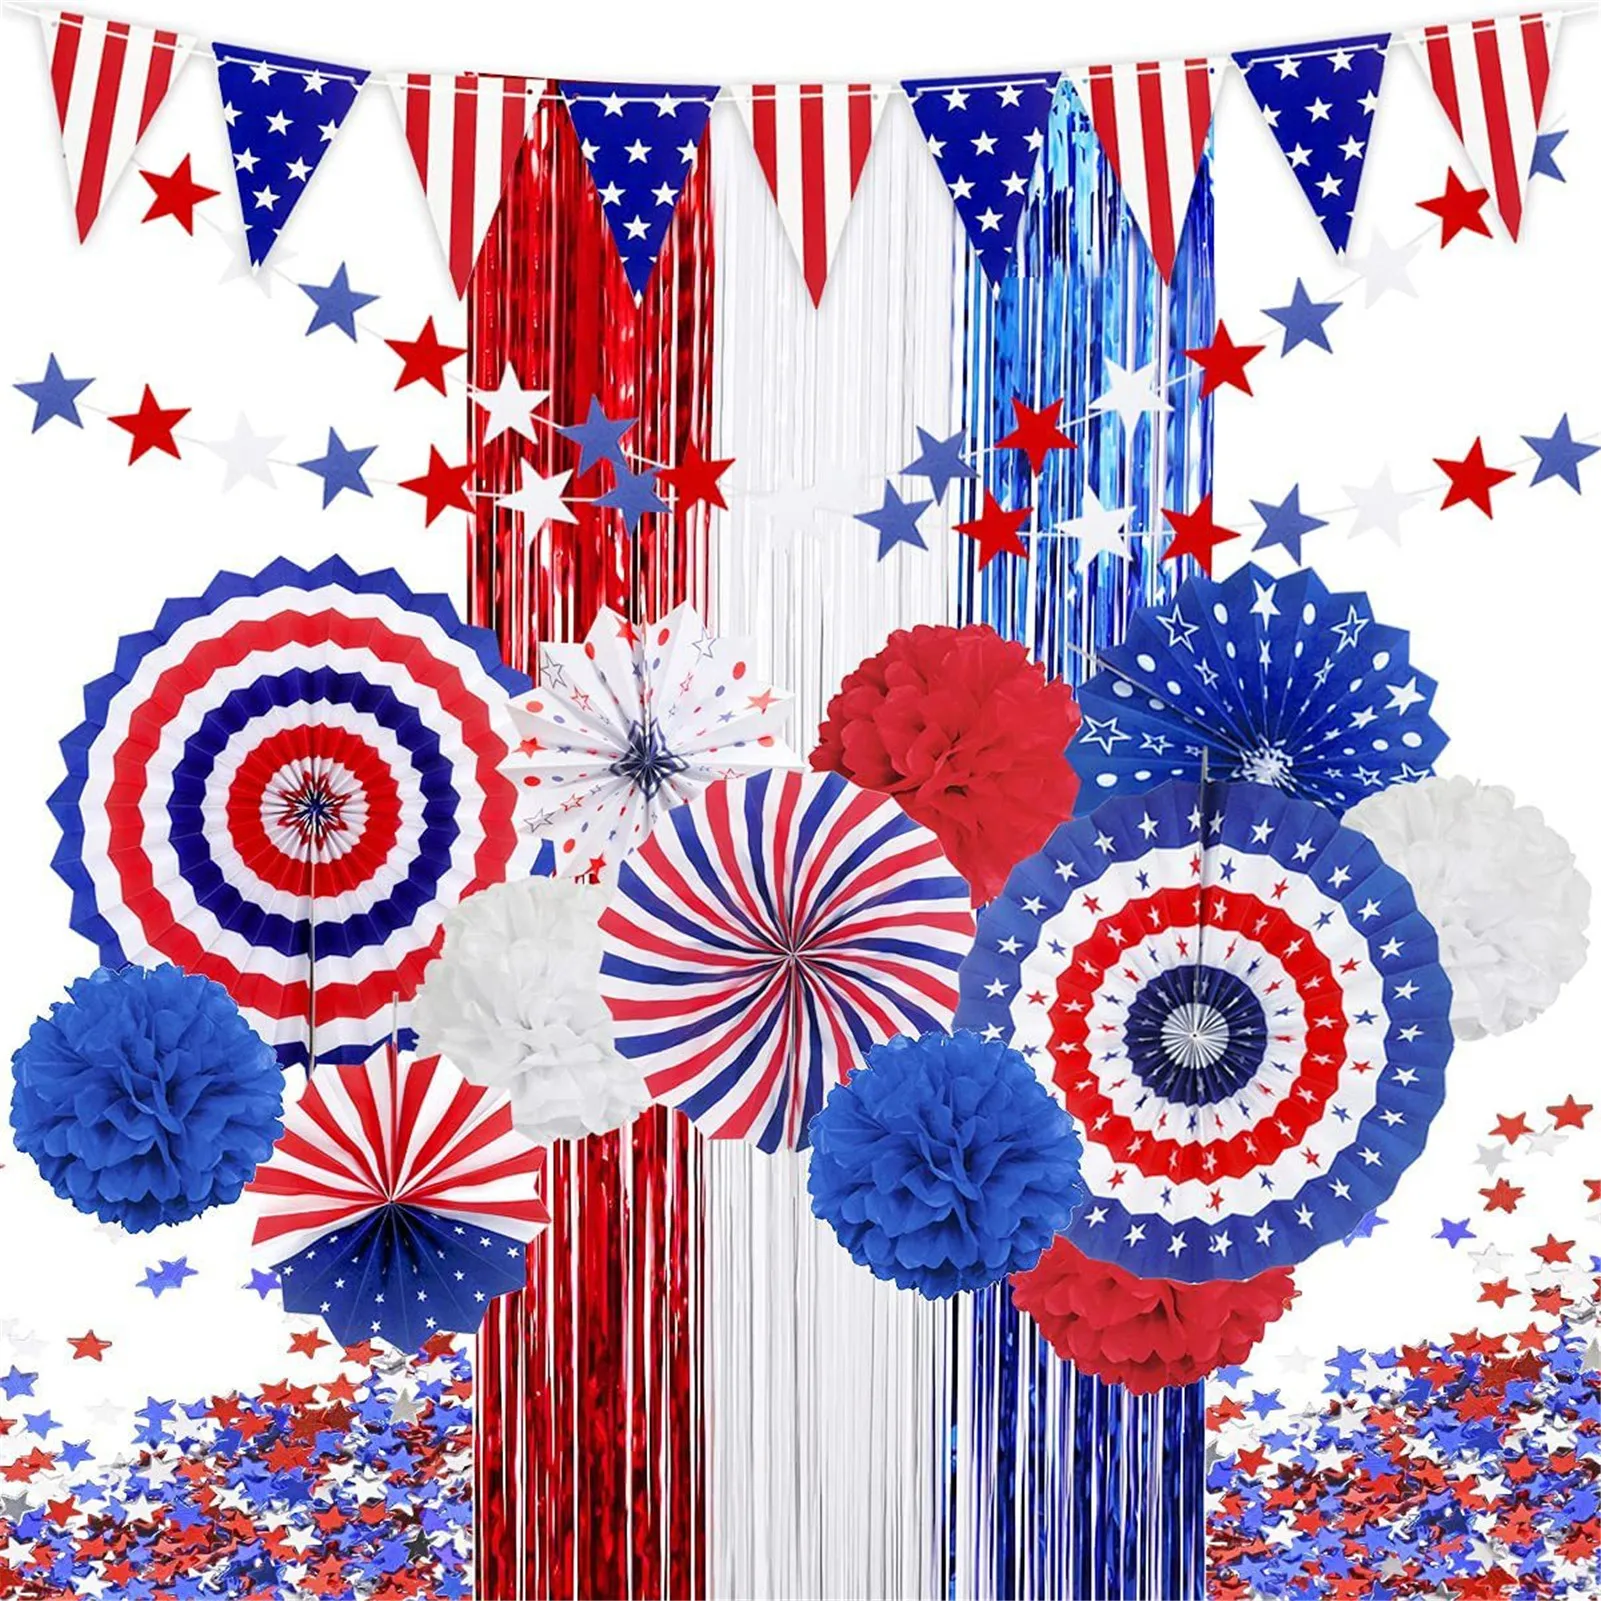 Red White Royal Blue Crepe Paper Streamer Patriotic Party Decorations 4th  of July USA American National Day Party Birthday Decor - AliExpress